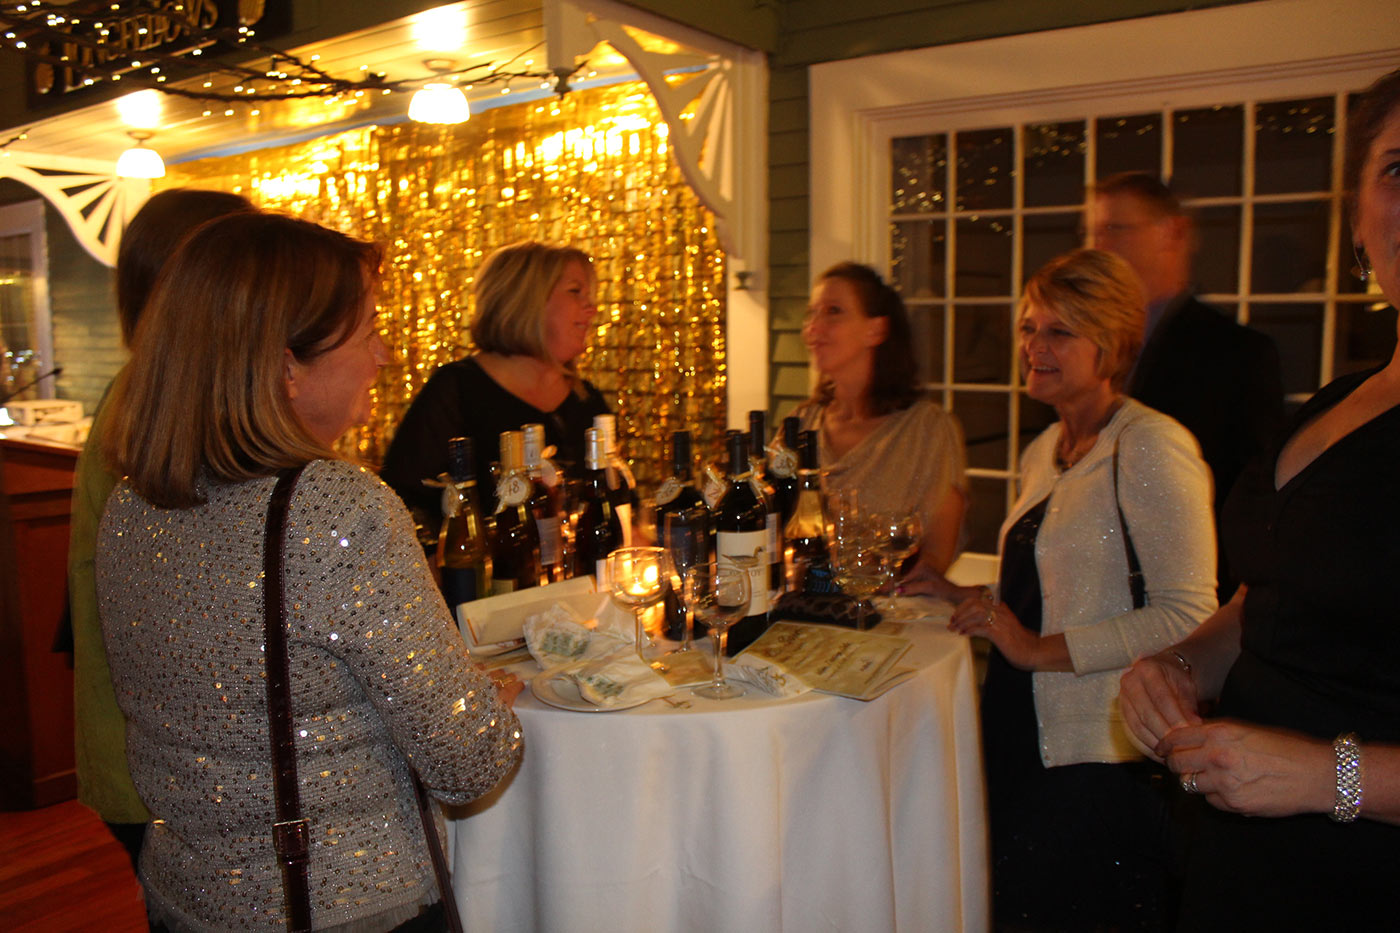 guests gathered around a table stocked with wine